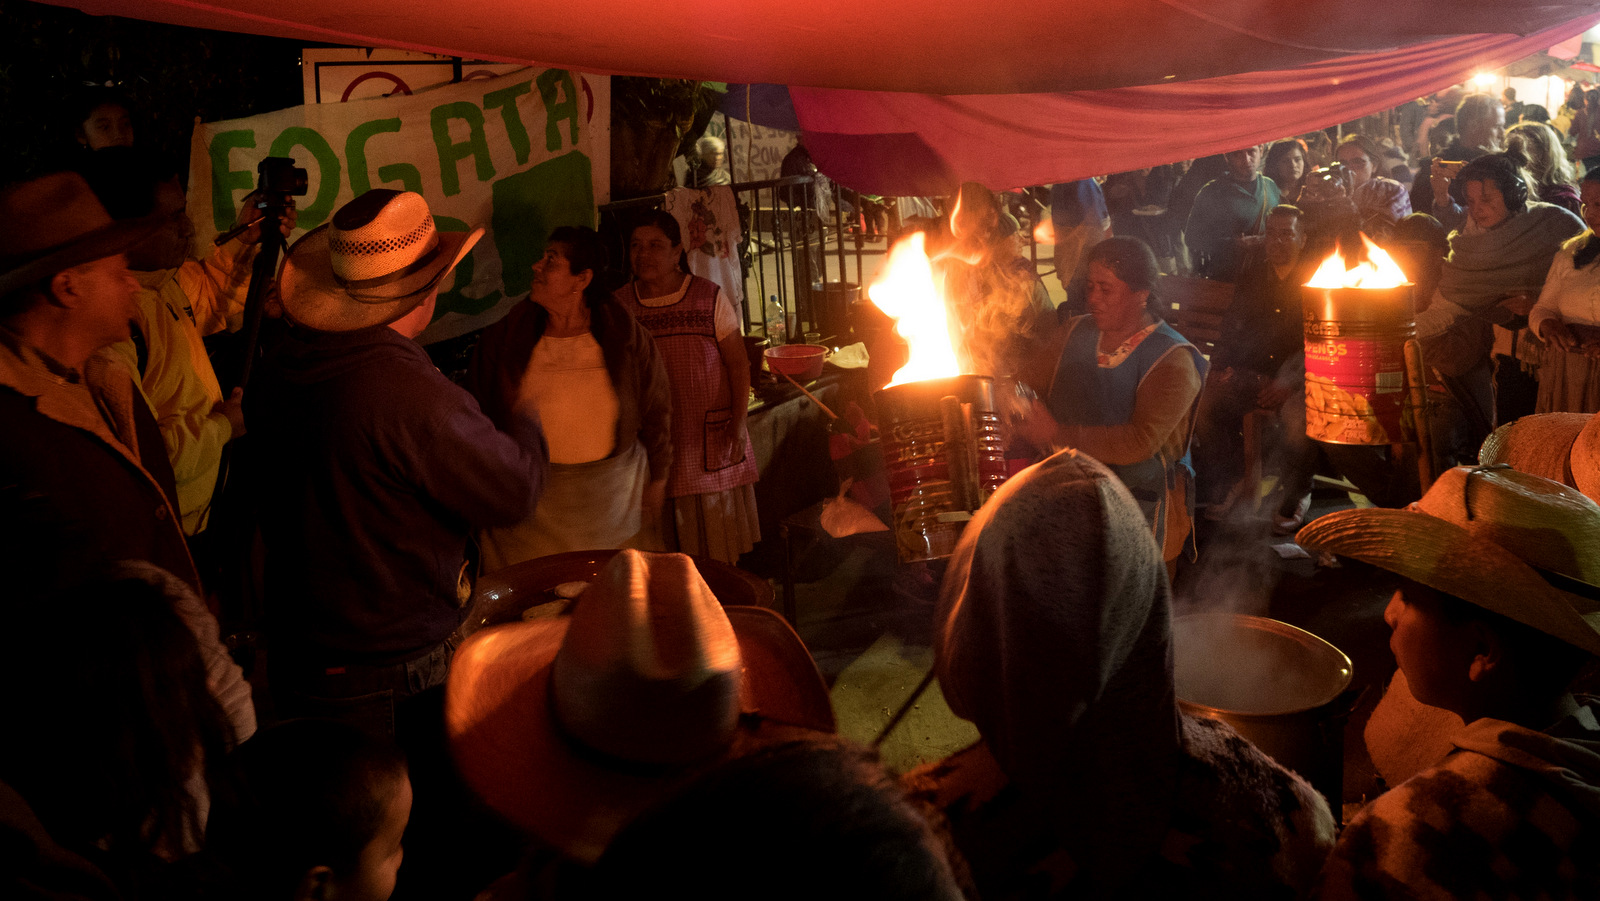 A small crowd visits one of the local bonfires, a part of events commemorating the seventh anniversary of the community uprising against illegal loggers and organized crime in Cheran, Michoacan, April 15, 2018. (Photo: José Luis Granados Ceja)